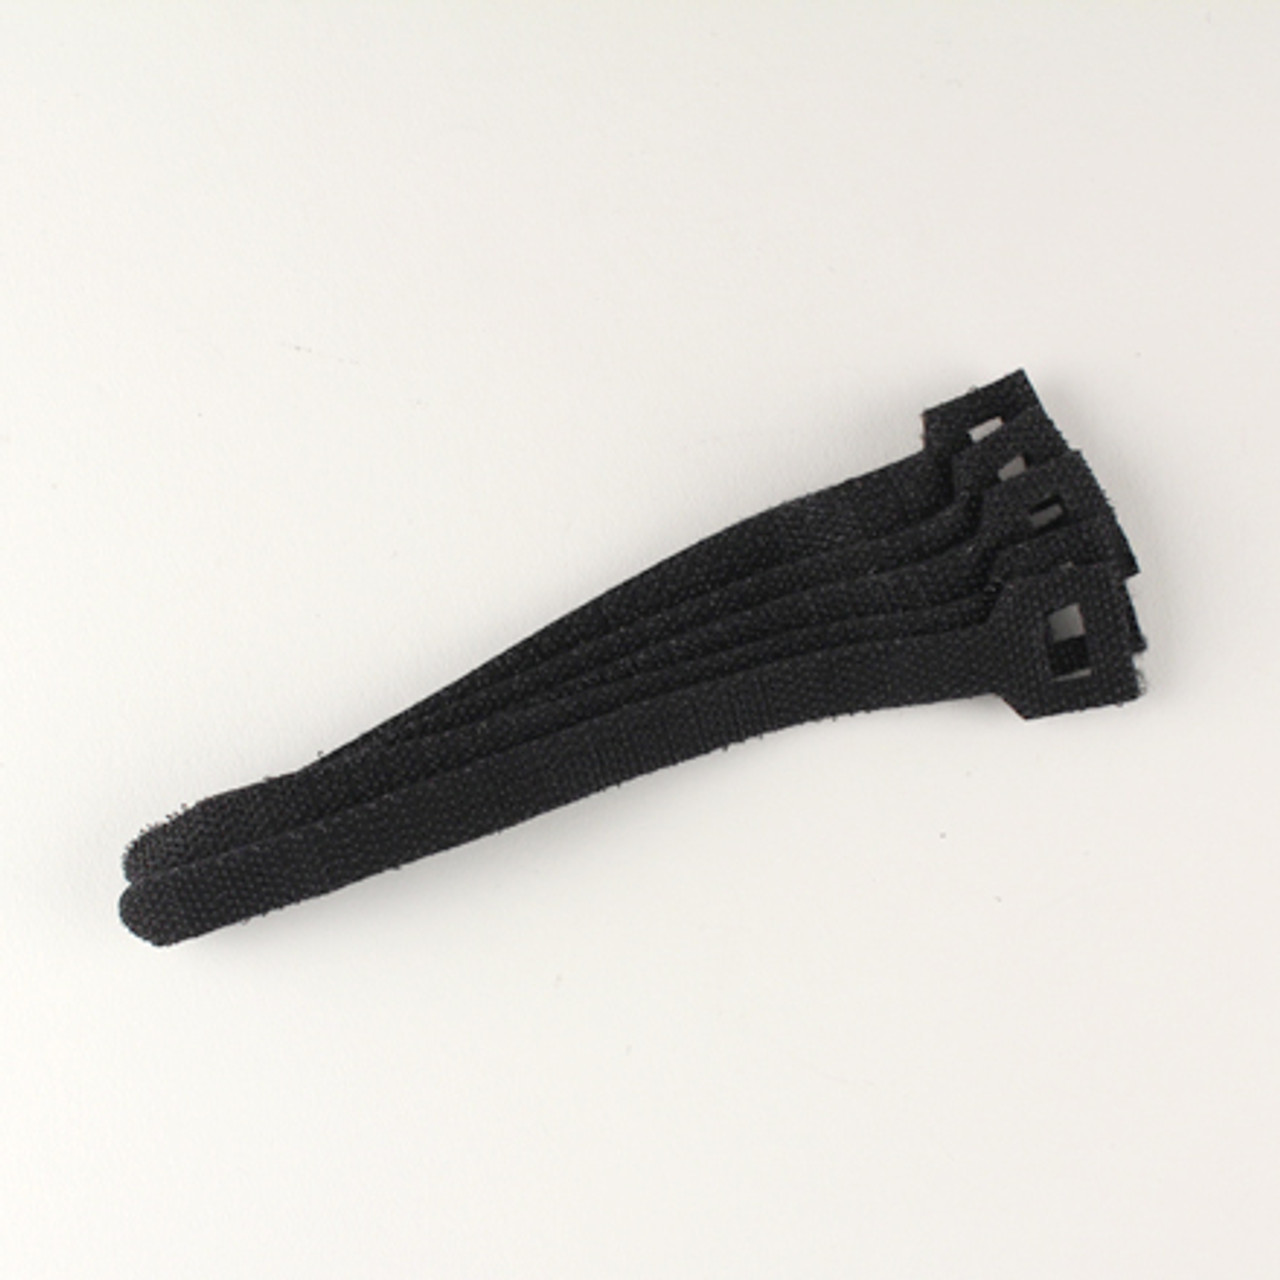 Velcro Cable Ties 6” Black - PKG of 5